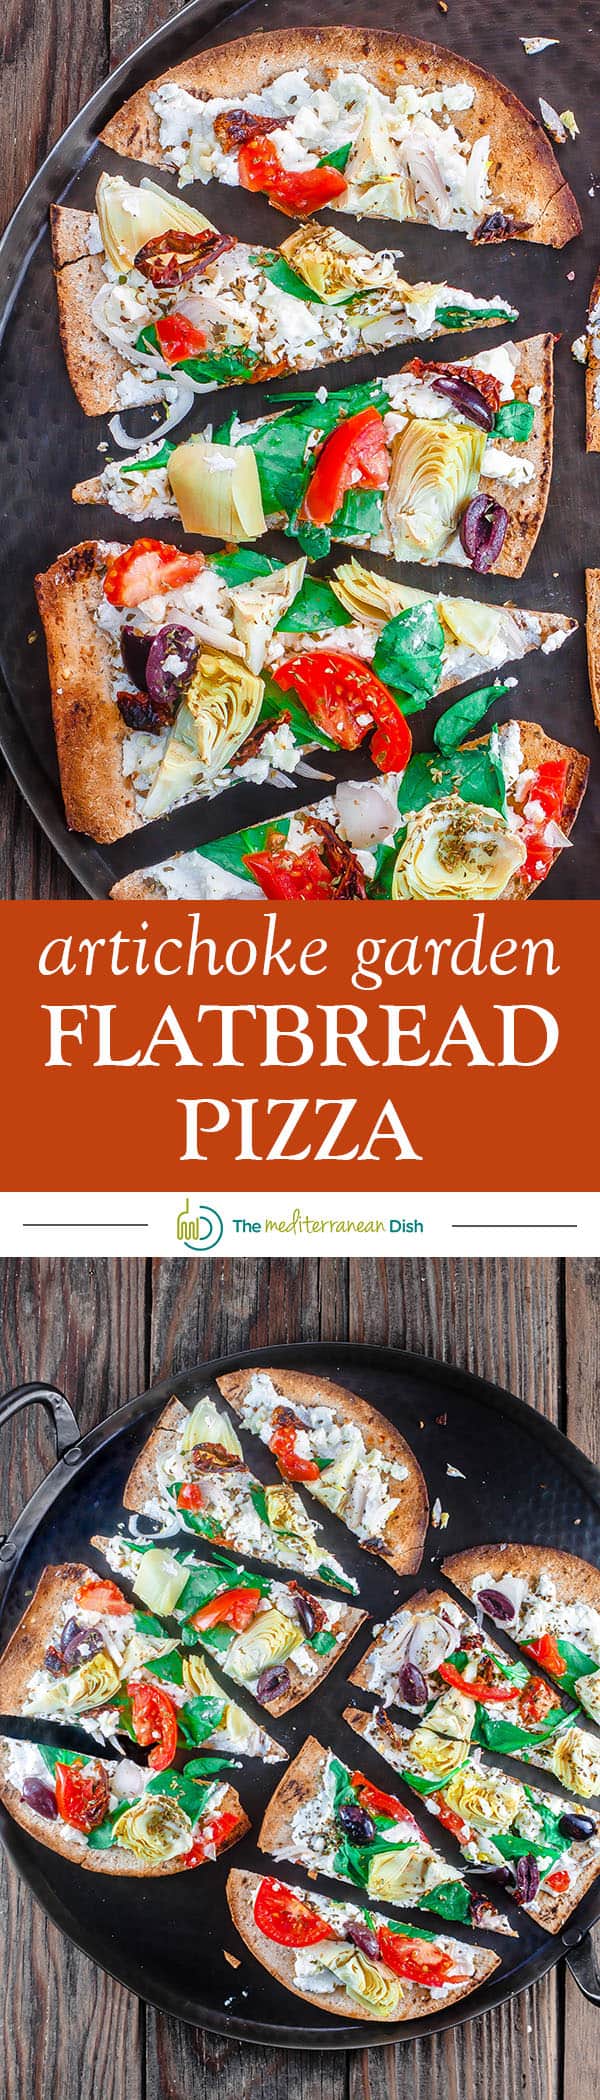 15-minute Artichoke Garden Flatbread Pizza | The Mediterranean Dish. Mediterranean-style flatbread pizza with artichokes, tomatoes, olives, feta and more! With ready low-carb, high fiber Flatout® Flatbread!